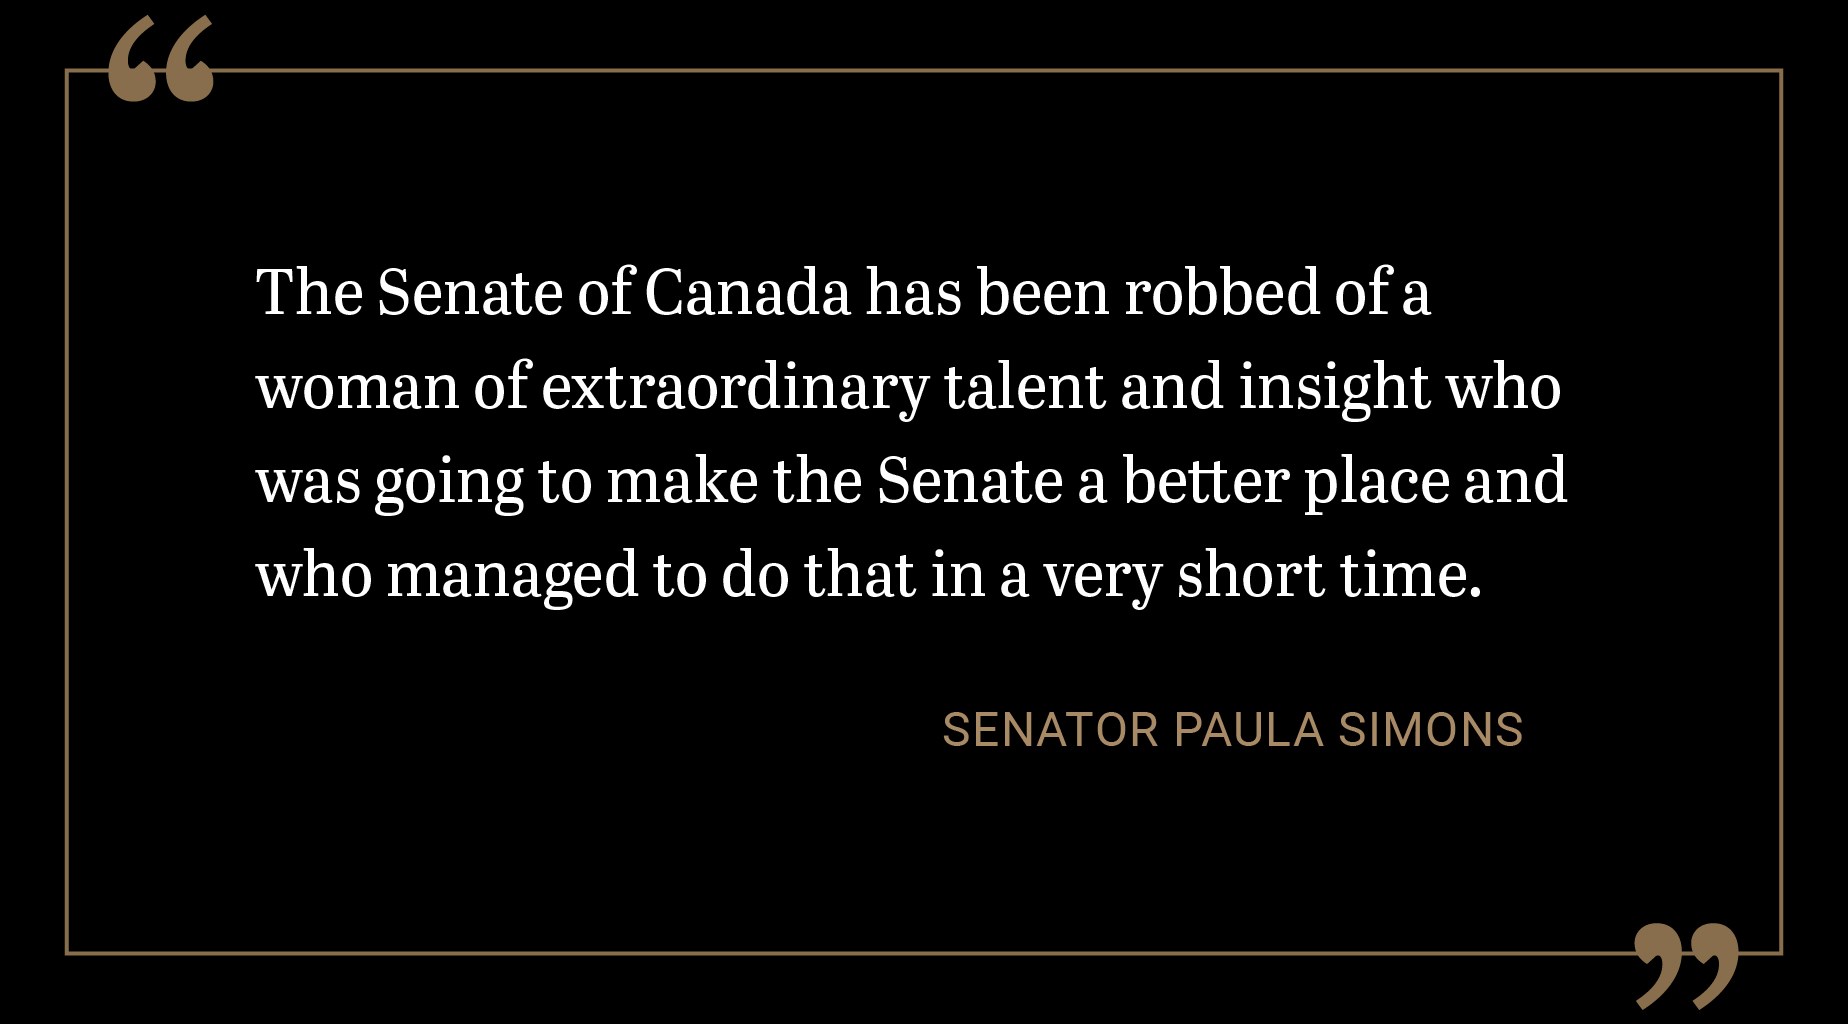 The Senate of Canada has been robbed of a woman of extraordinary talent and insight who was going to make the Senate a better place and who managed to do that in a very short time.